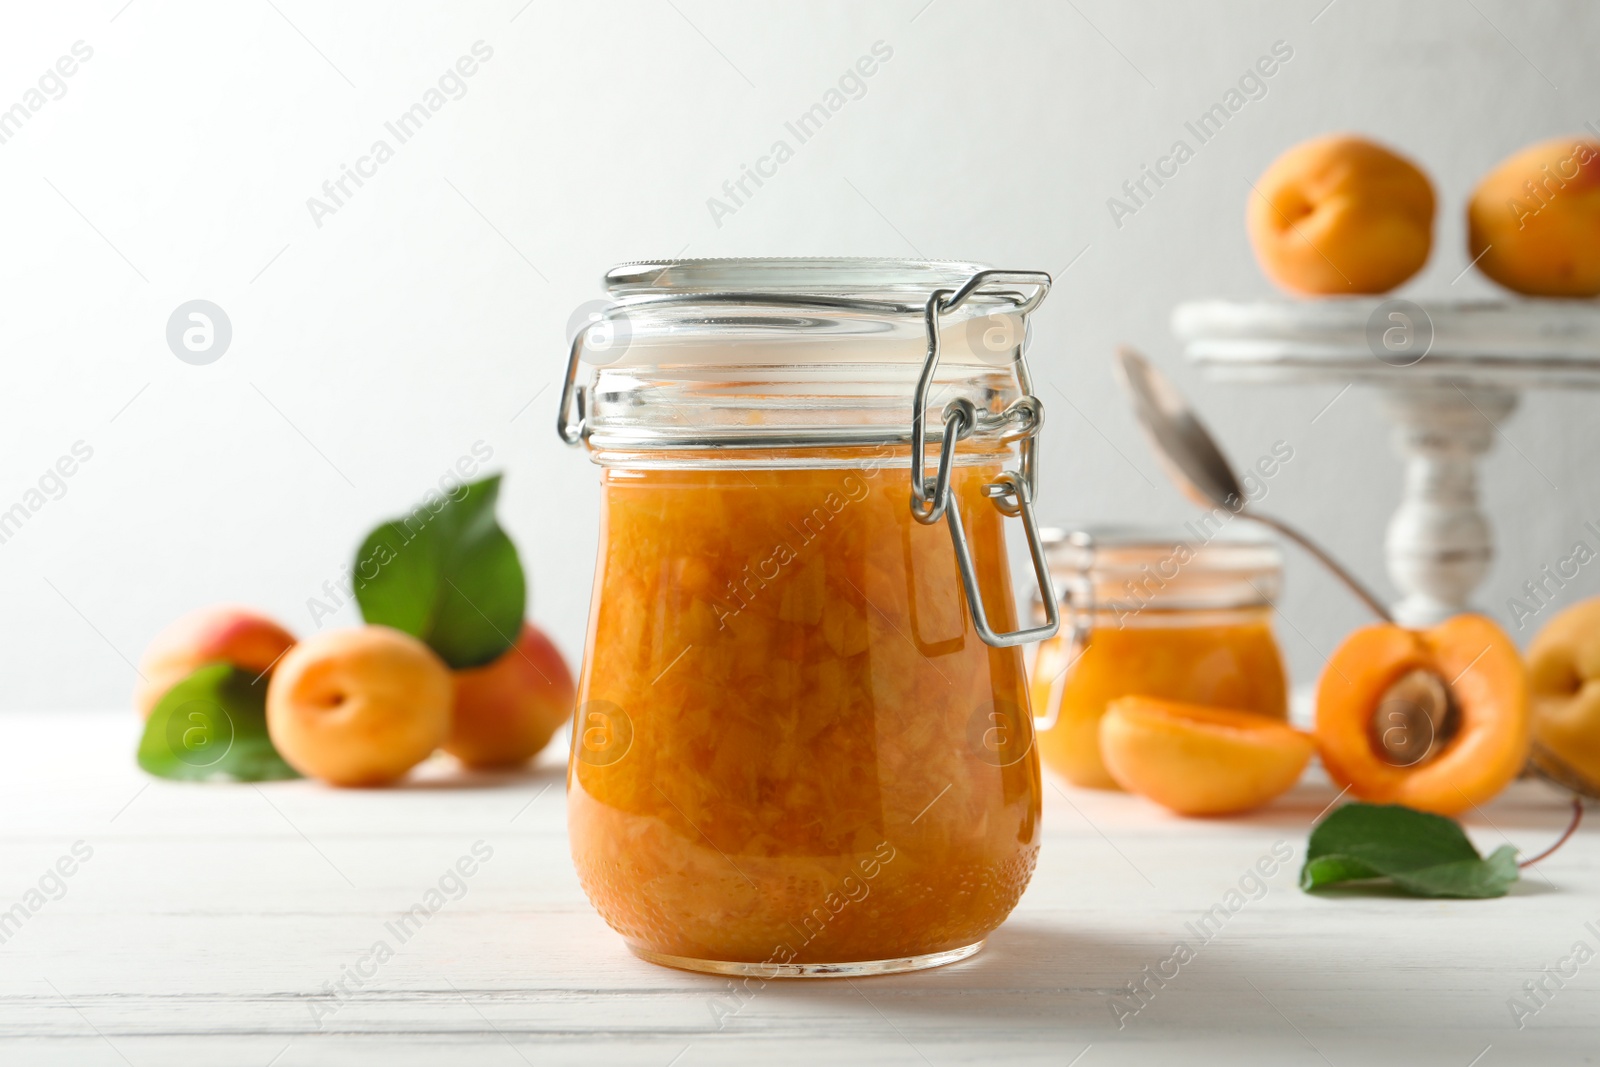 Photo of Jar of apricot jam and fresh fruits on white wooden table